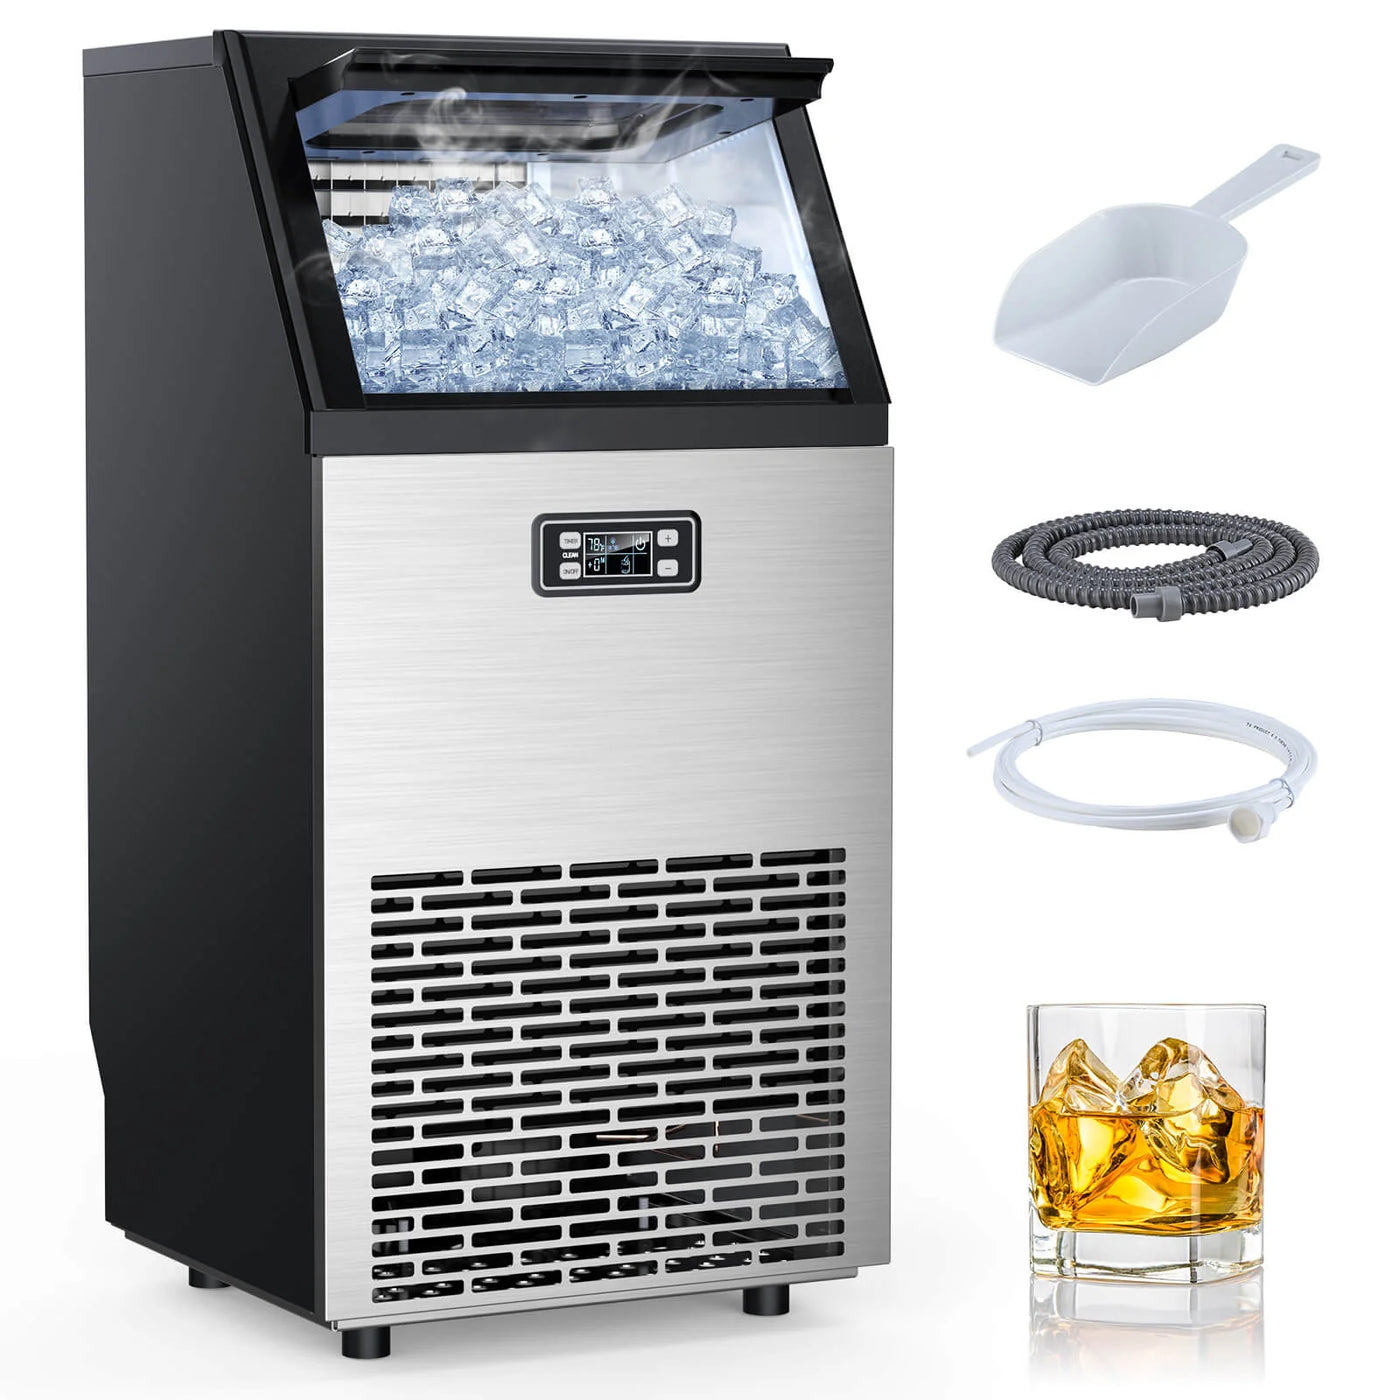 100LBS Freestanding Commercial Ice Maker - $260